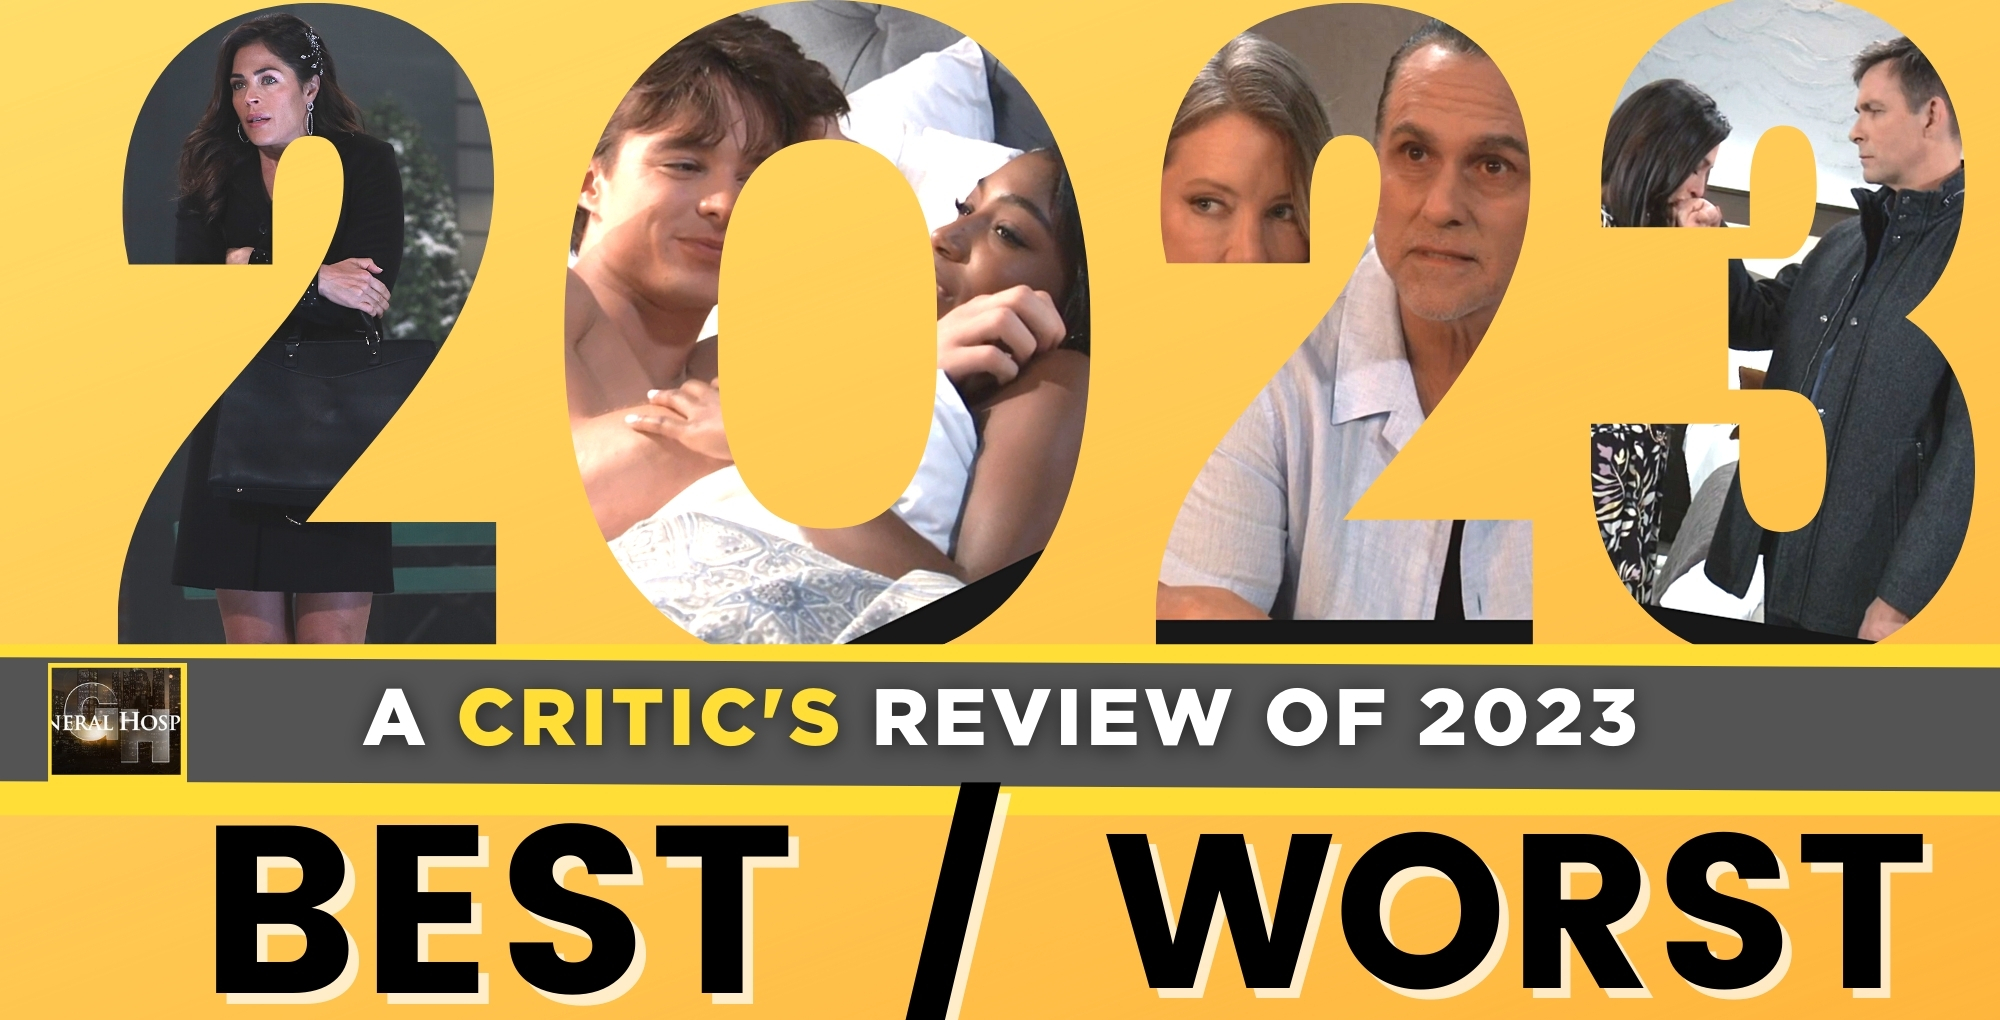 general hospital critic's review for 2023 – roundup of the best and worst.